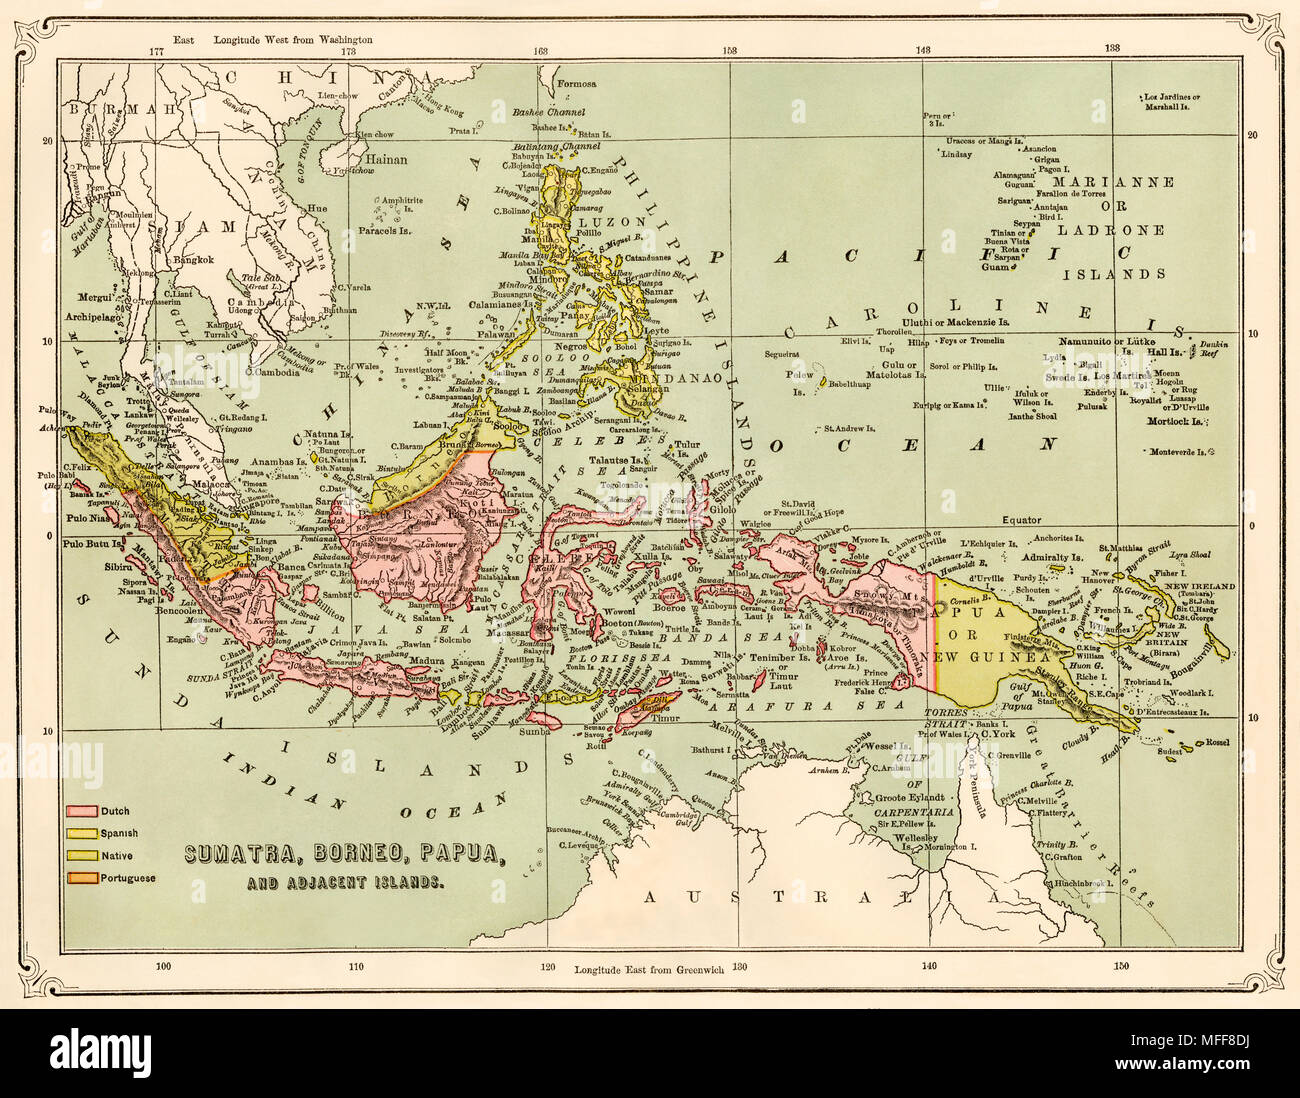 Map of Sumatra, Borneo, New Guinea, and adjacent islands, 1870s. Printed color lithograph Stock Photo